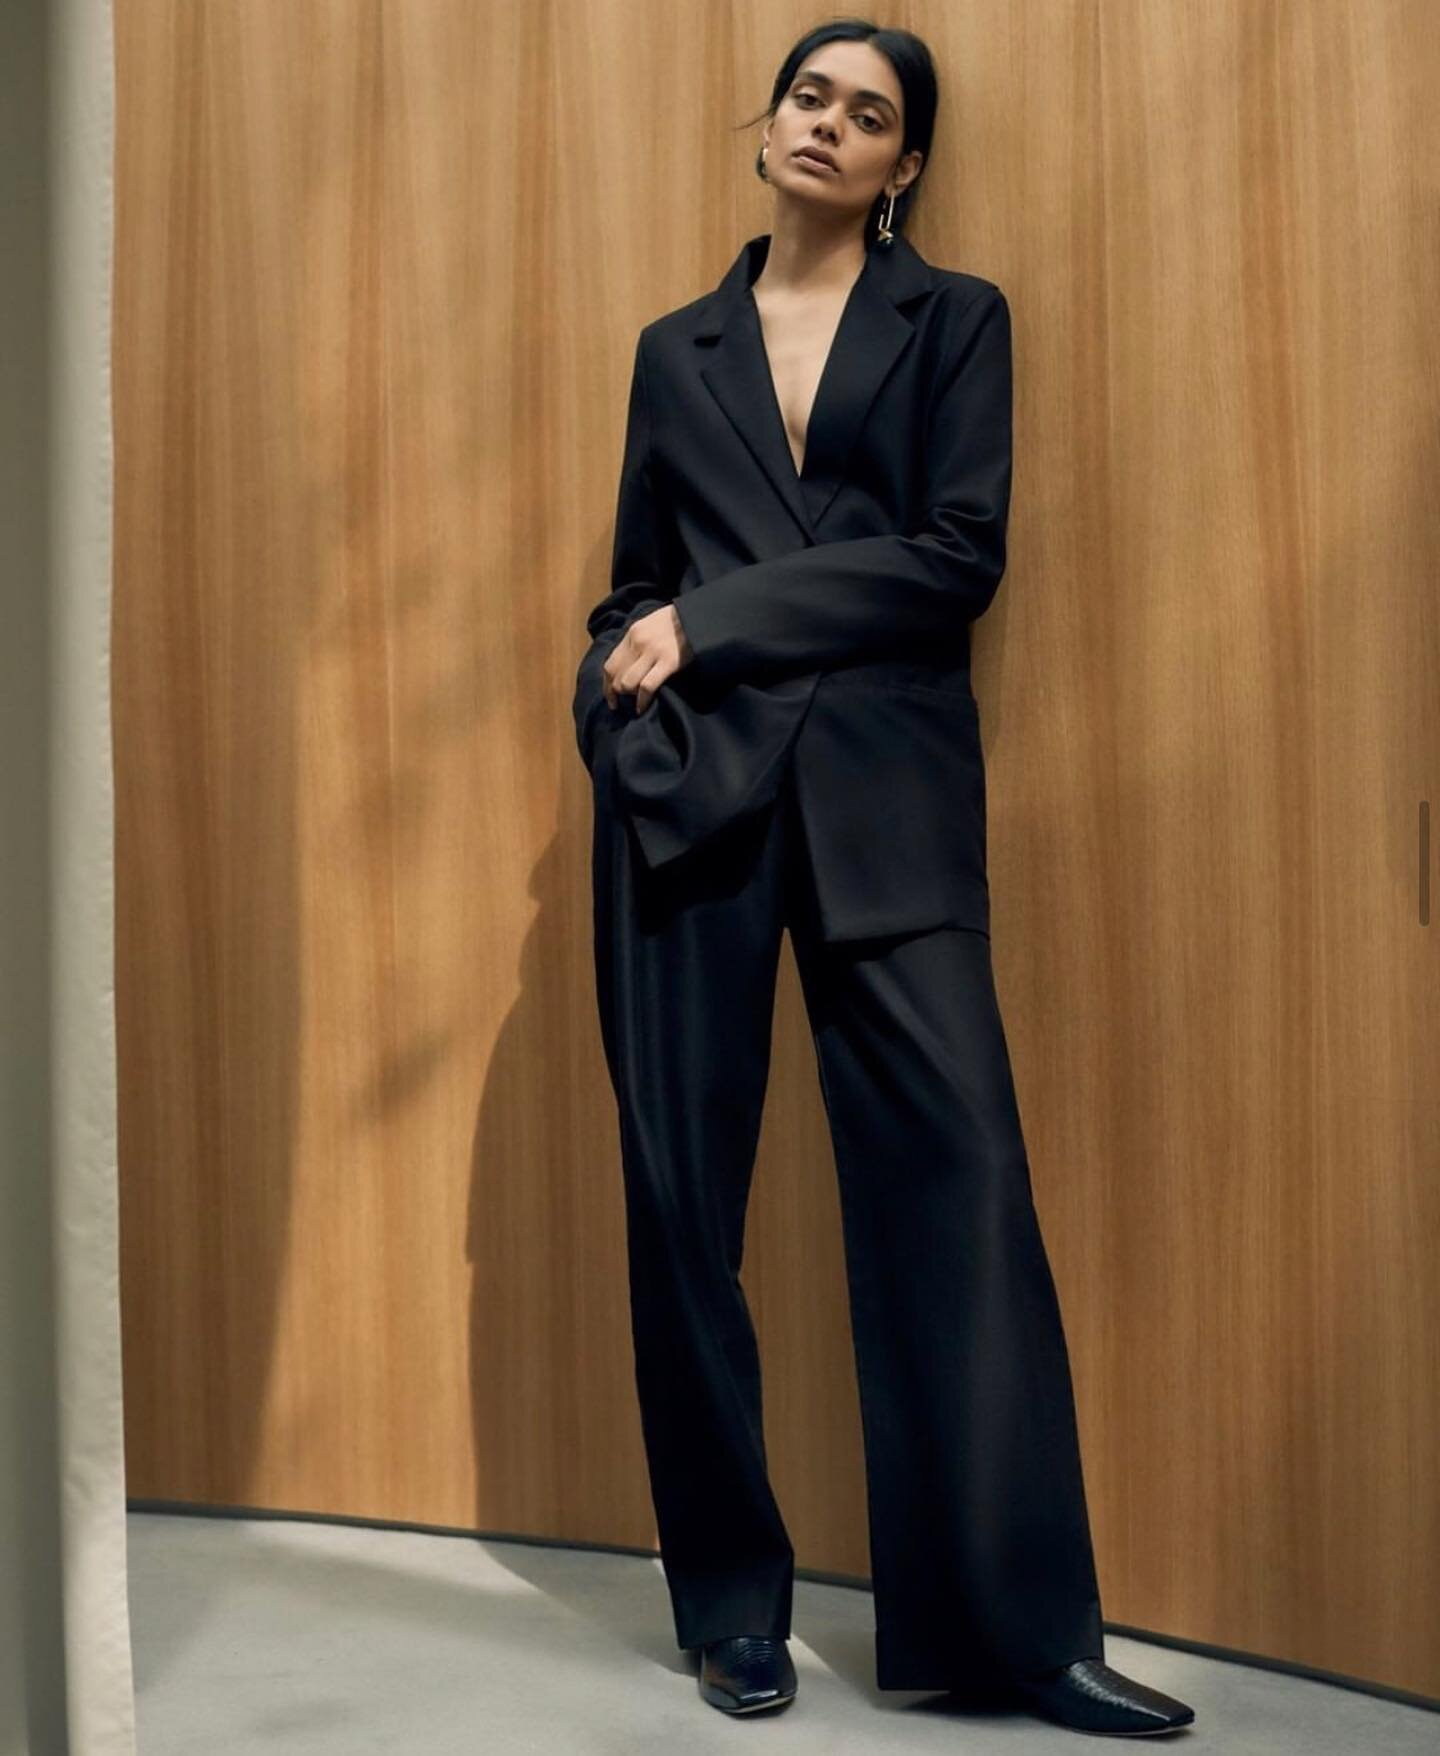 @kowtowclothing nailing it with the vegan, ethical &amp; sustainable suit game 🖤 

We love that all of Kowtow&rsquo;s garments are made in a transparent supply chain, which works with fair trade certified farmers and manufacturers, from seed to garm